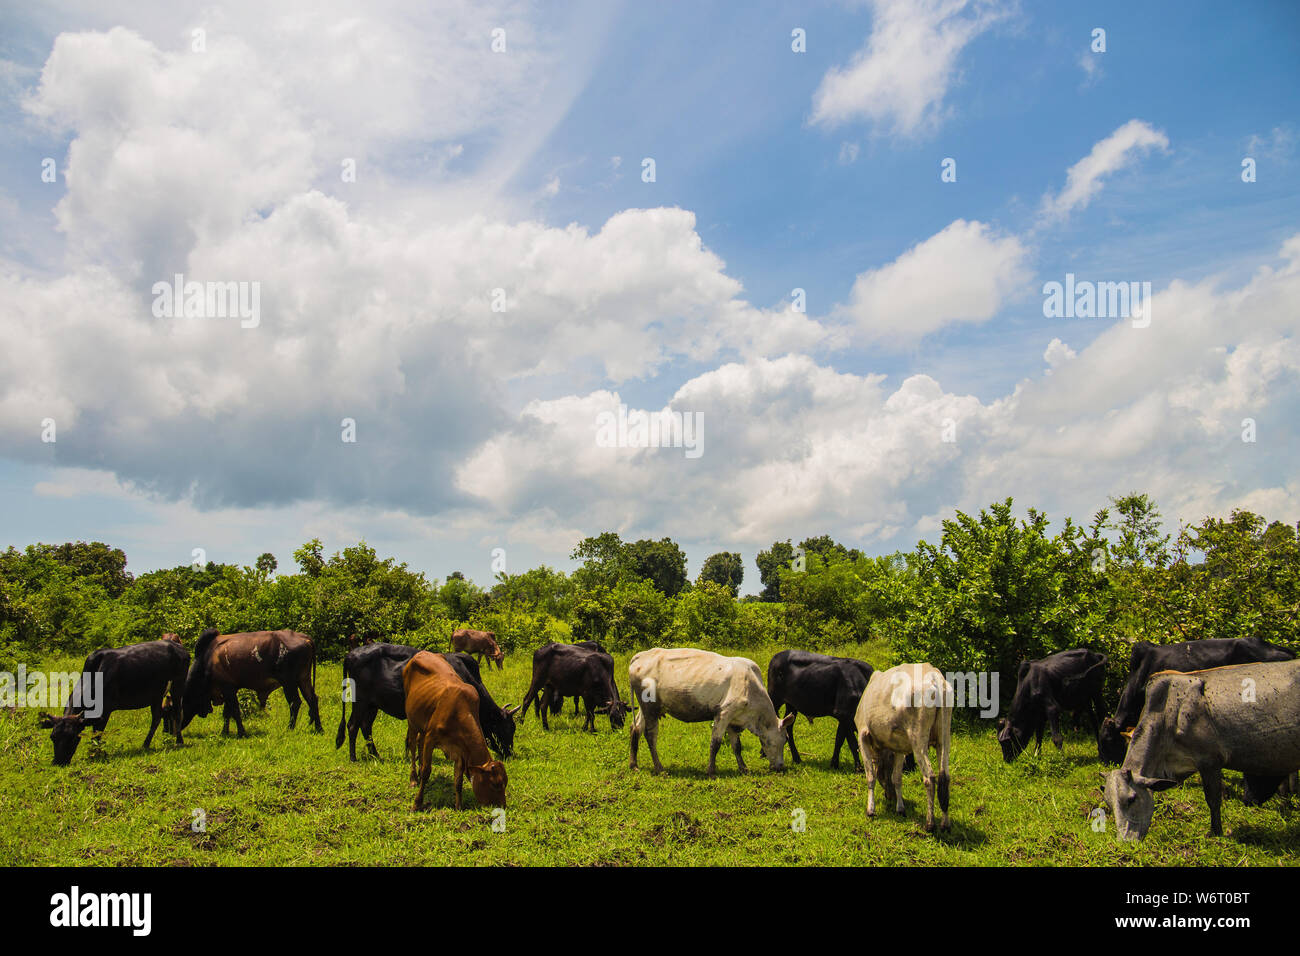 Cattle breeding. Herd of African cattle. Husbandry. Cows. Beautiful landscape. Close up. Stock Photo